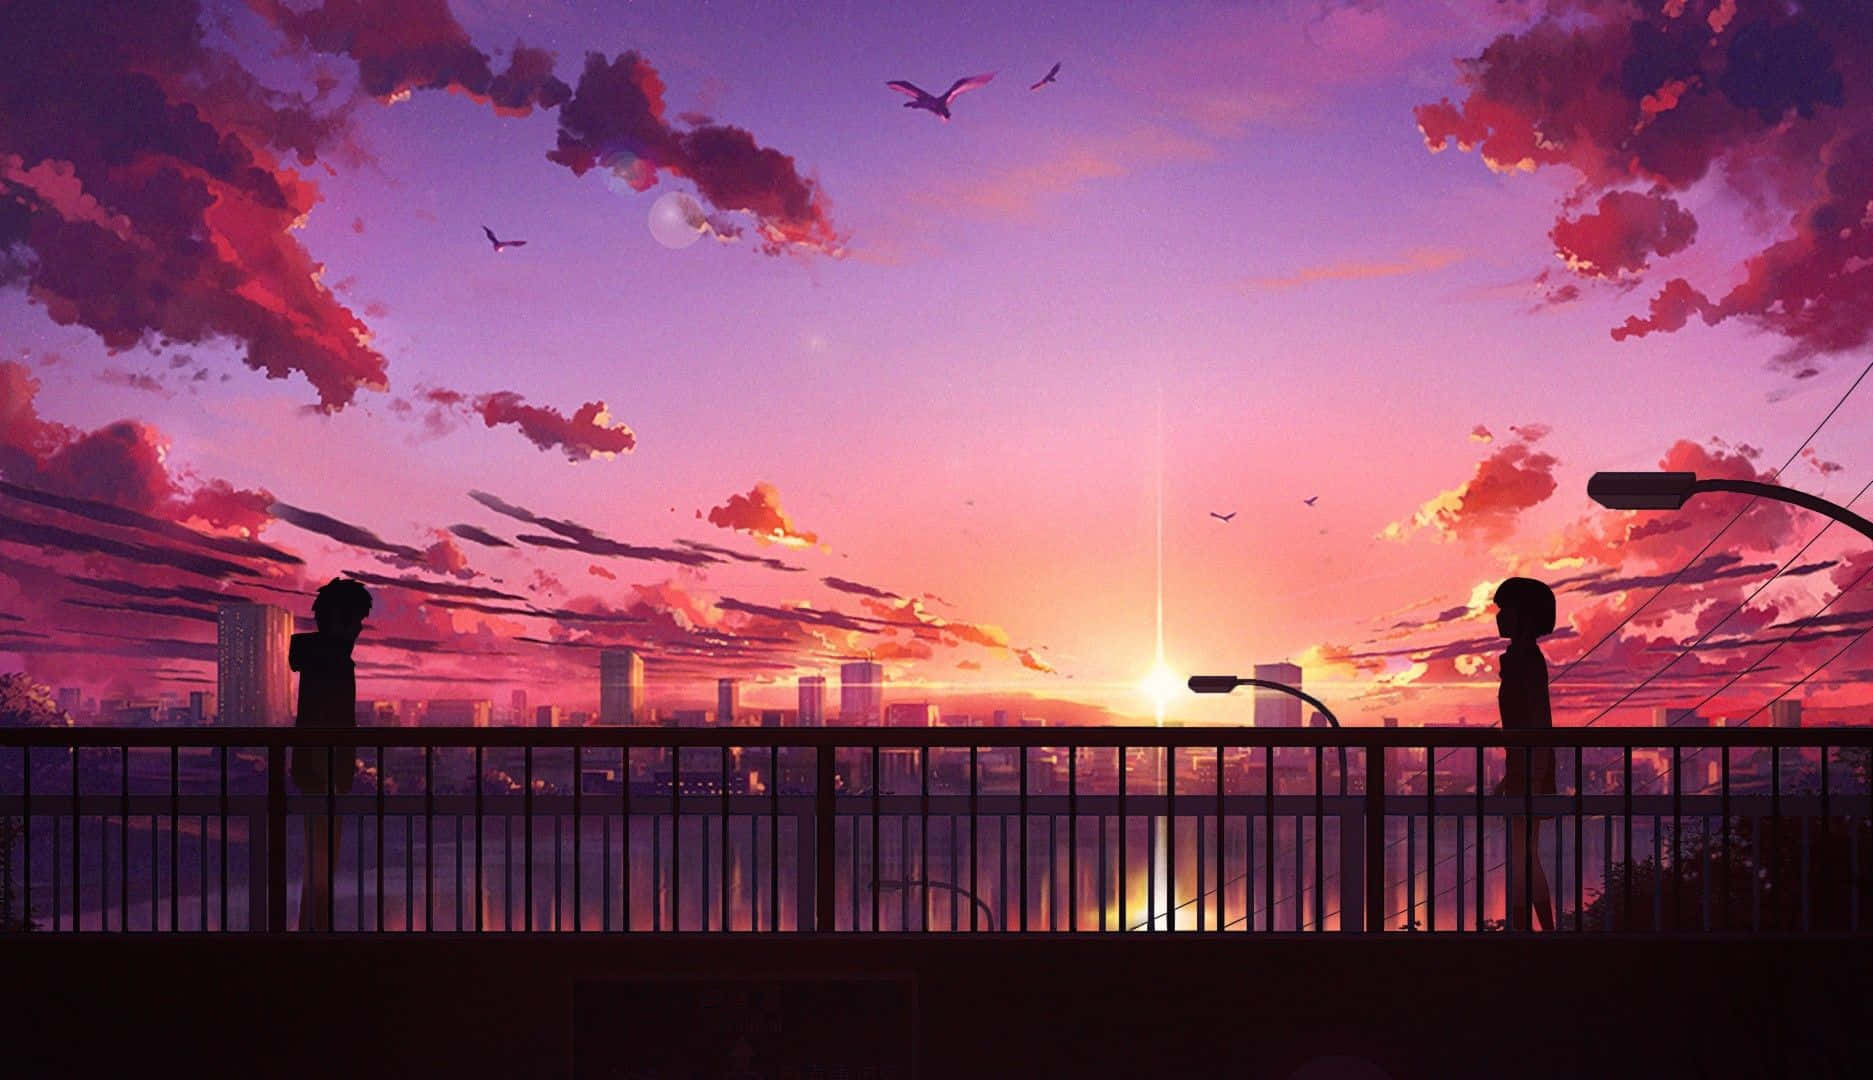 Immersed In The Beauty Of Nature, A Silhouette Of A Young Girl Sits And Admires The Stunning Anime Sunset.